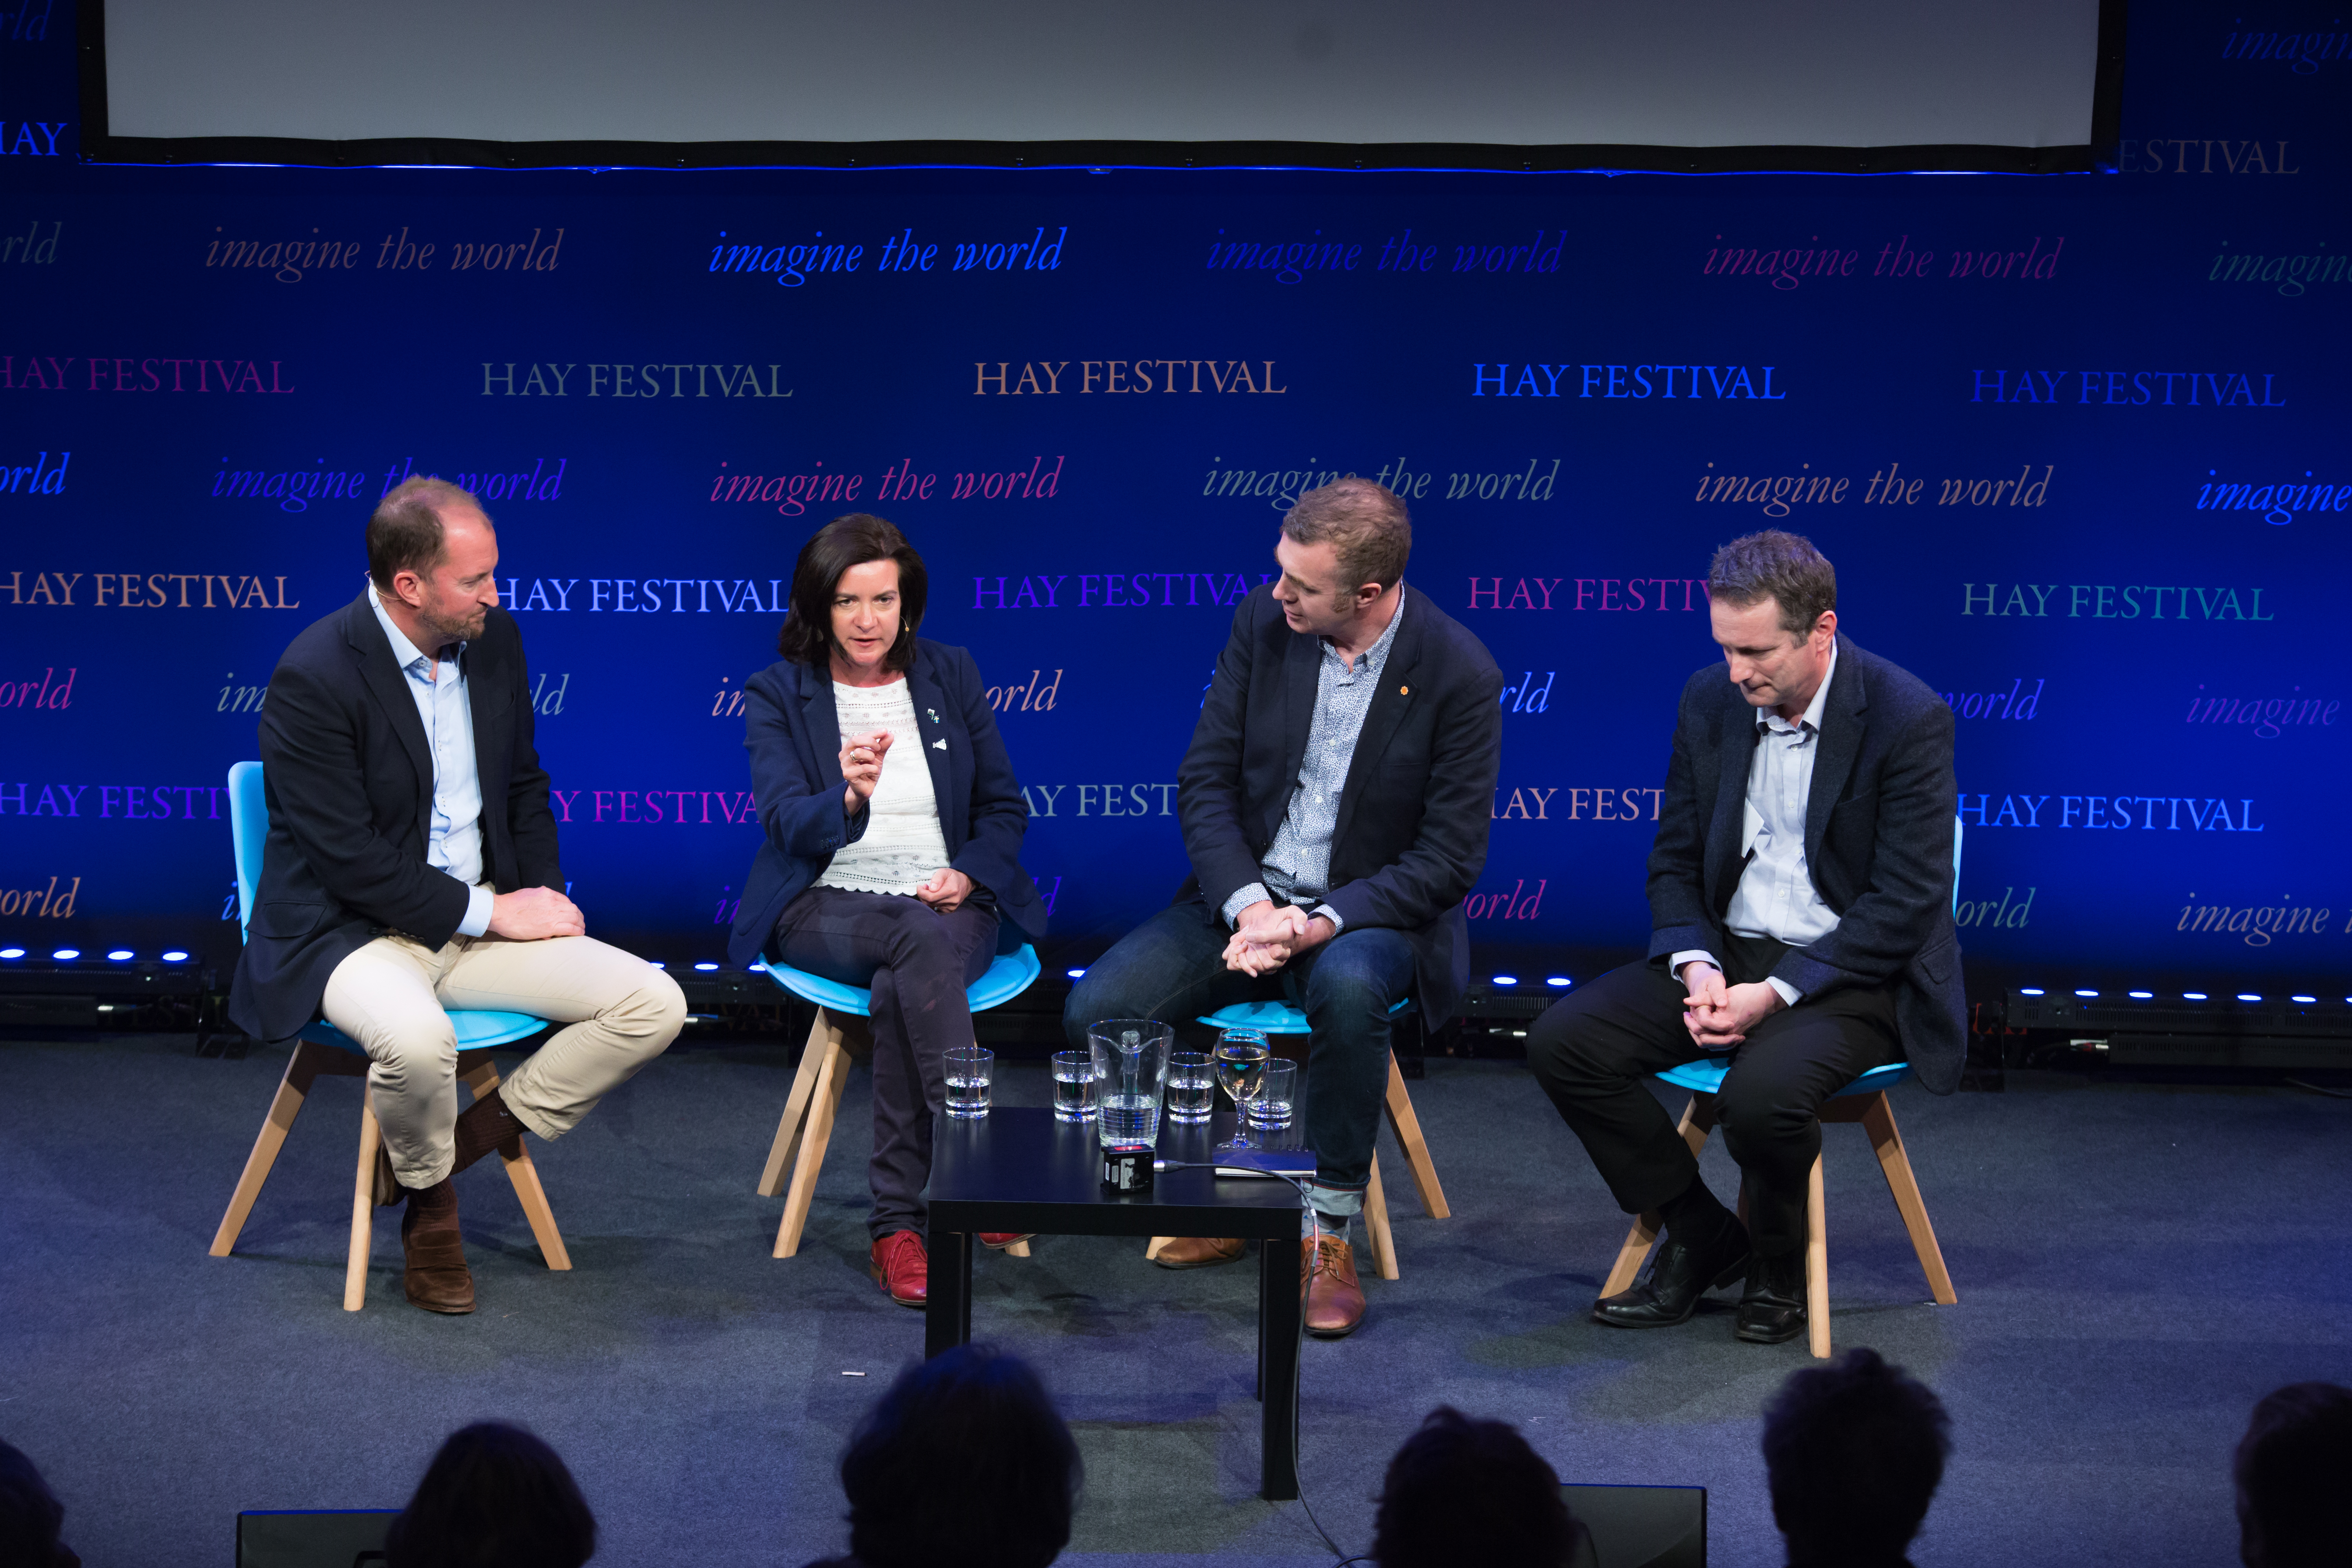 notes from the hay festival